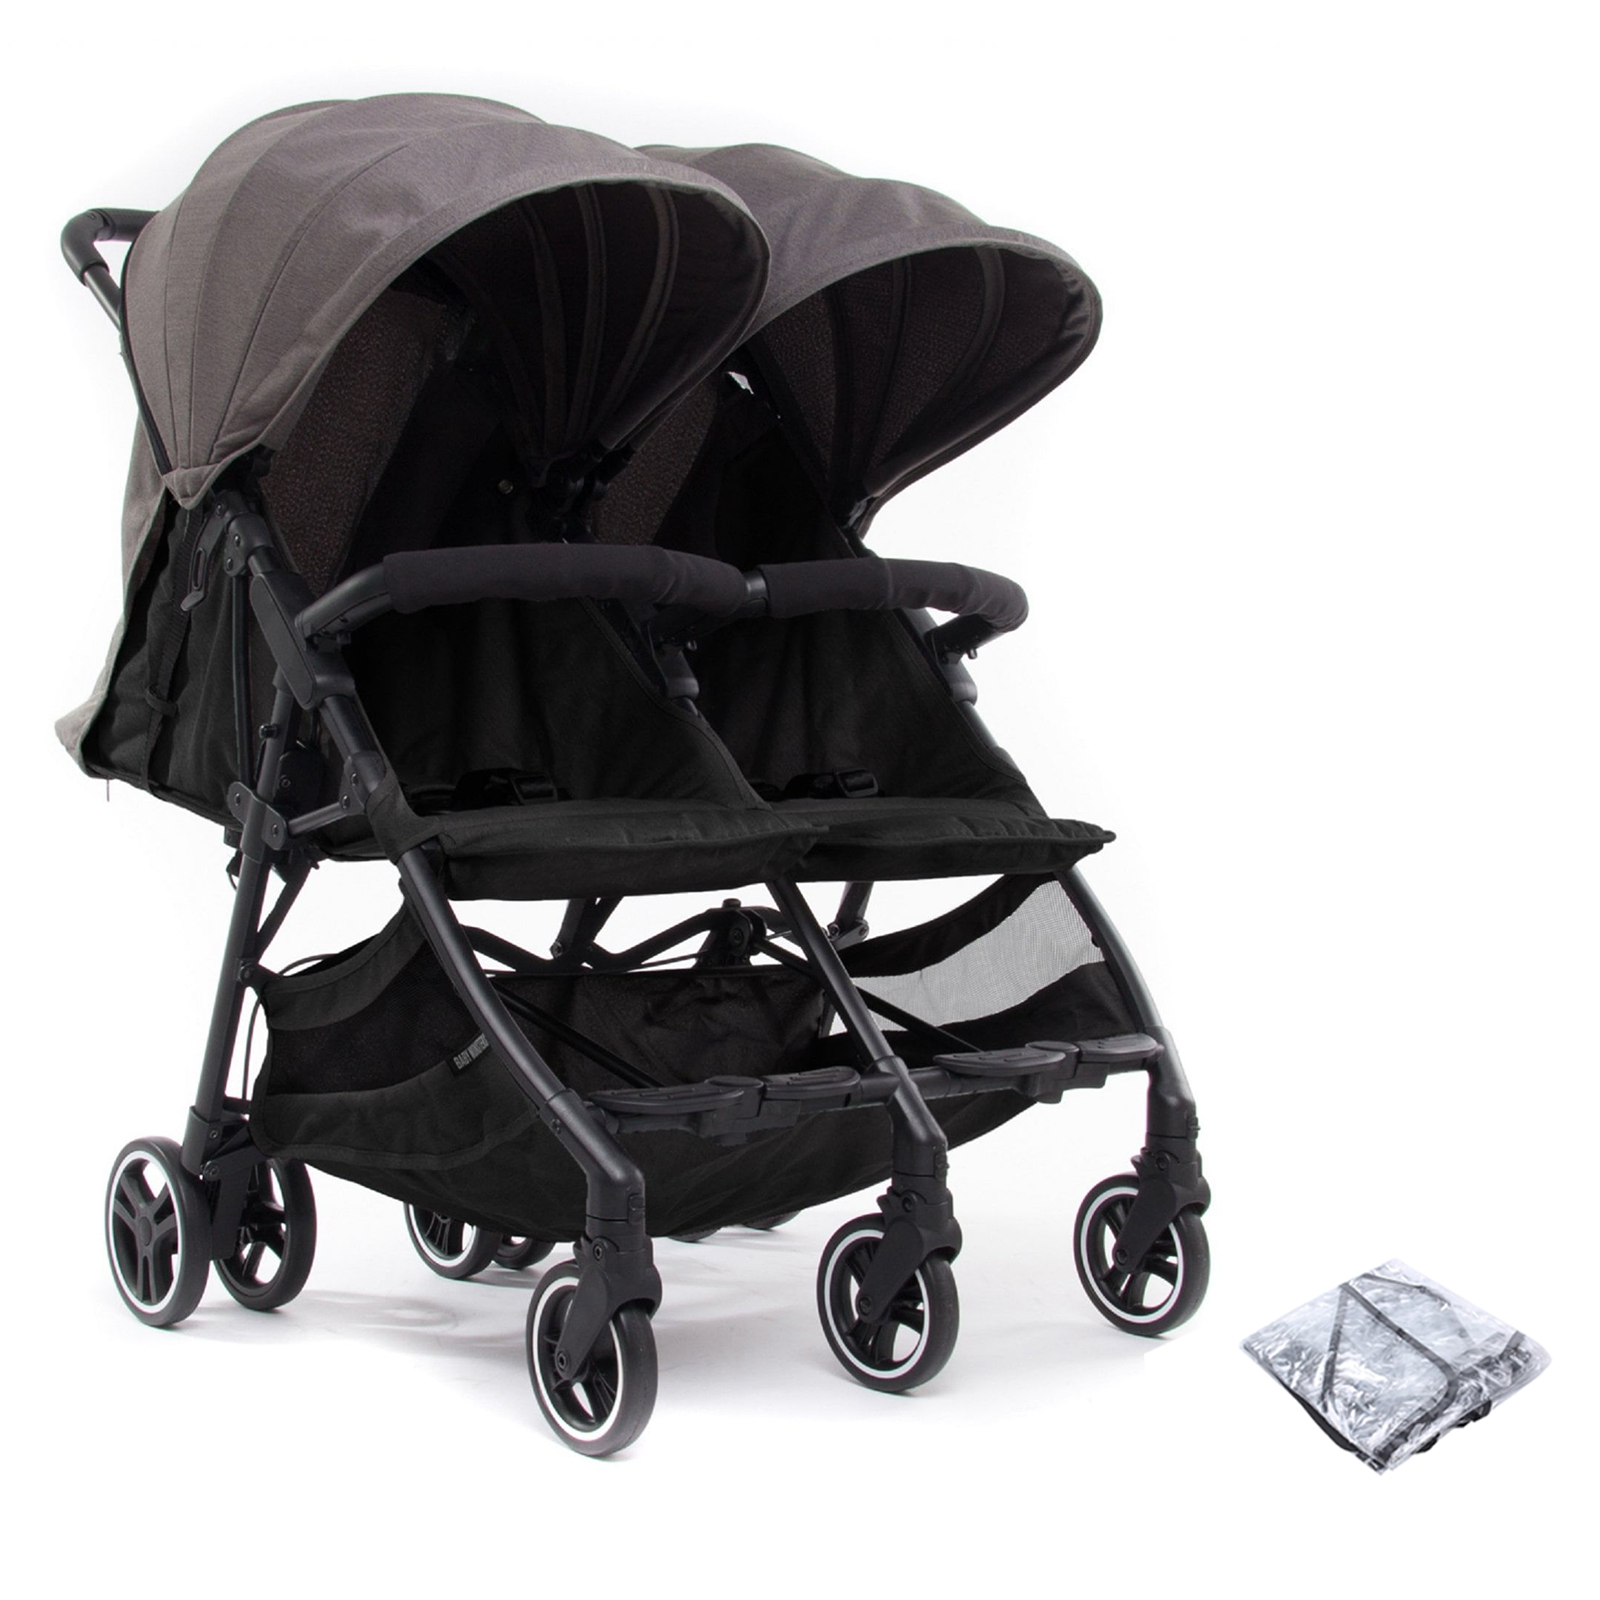 Baby Monsters Kuki Lightweight (9.8kg) Twin Double Pushchair with Raincover - Texas Grey